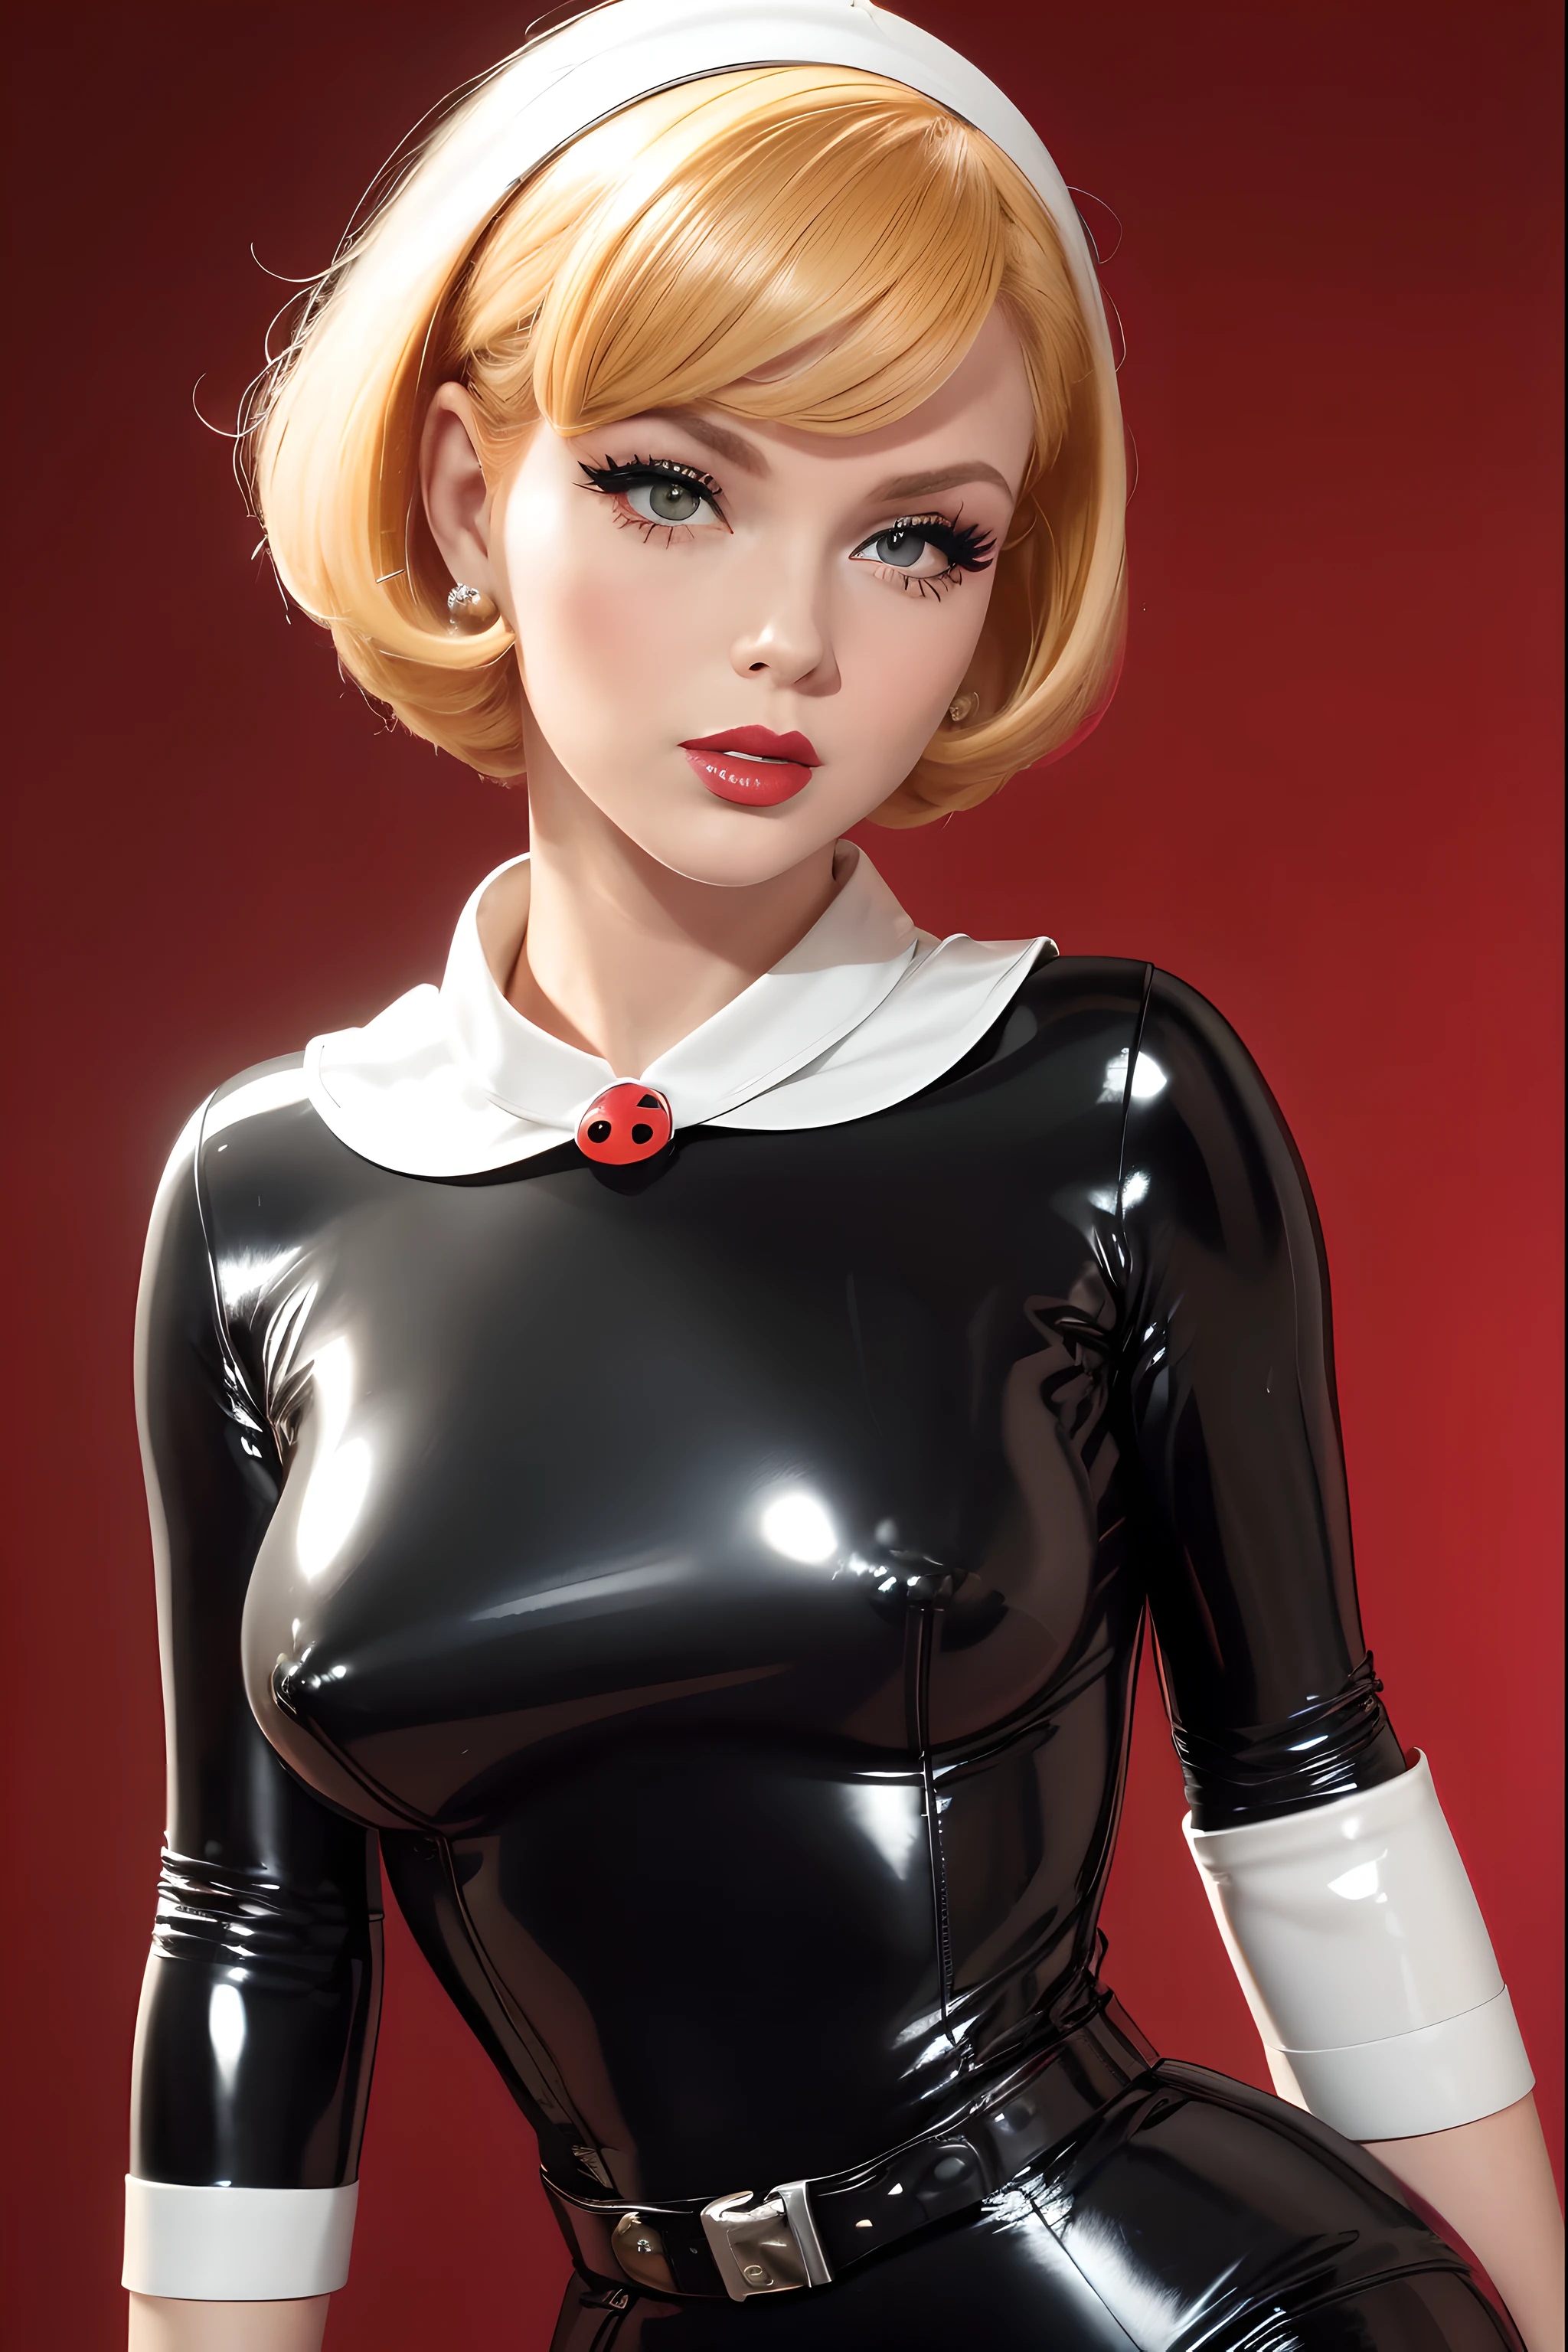 (((Masterpiece))) redhead woman with short hair in (((dressed in 1950's or 1960's pulp sci fi costume, Spy look, Black and White latex, White latex))) , a photo by Allan Linder, flickr, pop art, hair, 60s style, 60s style, brigitte bardot, 1960s style, retro 60s fashion, poppy, cut, medium yellow blond hair, pixie, redhead hair, sexy pose, small breast, beautiful sexy look, sweet lips, hard nipples, pink nipples, red lips, Double flick lined eyes, rock and roller makeup, lustful look, sexy eyes, red flat background,